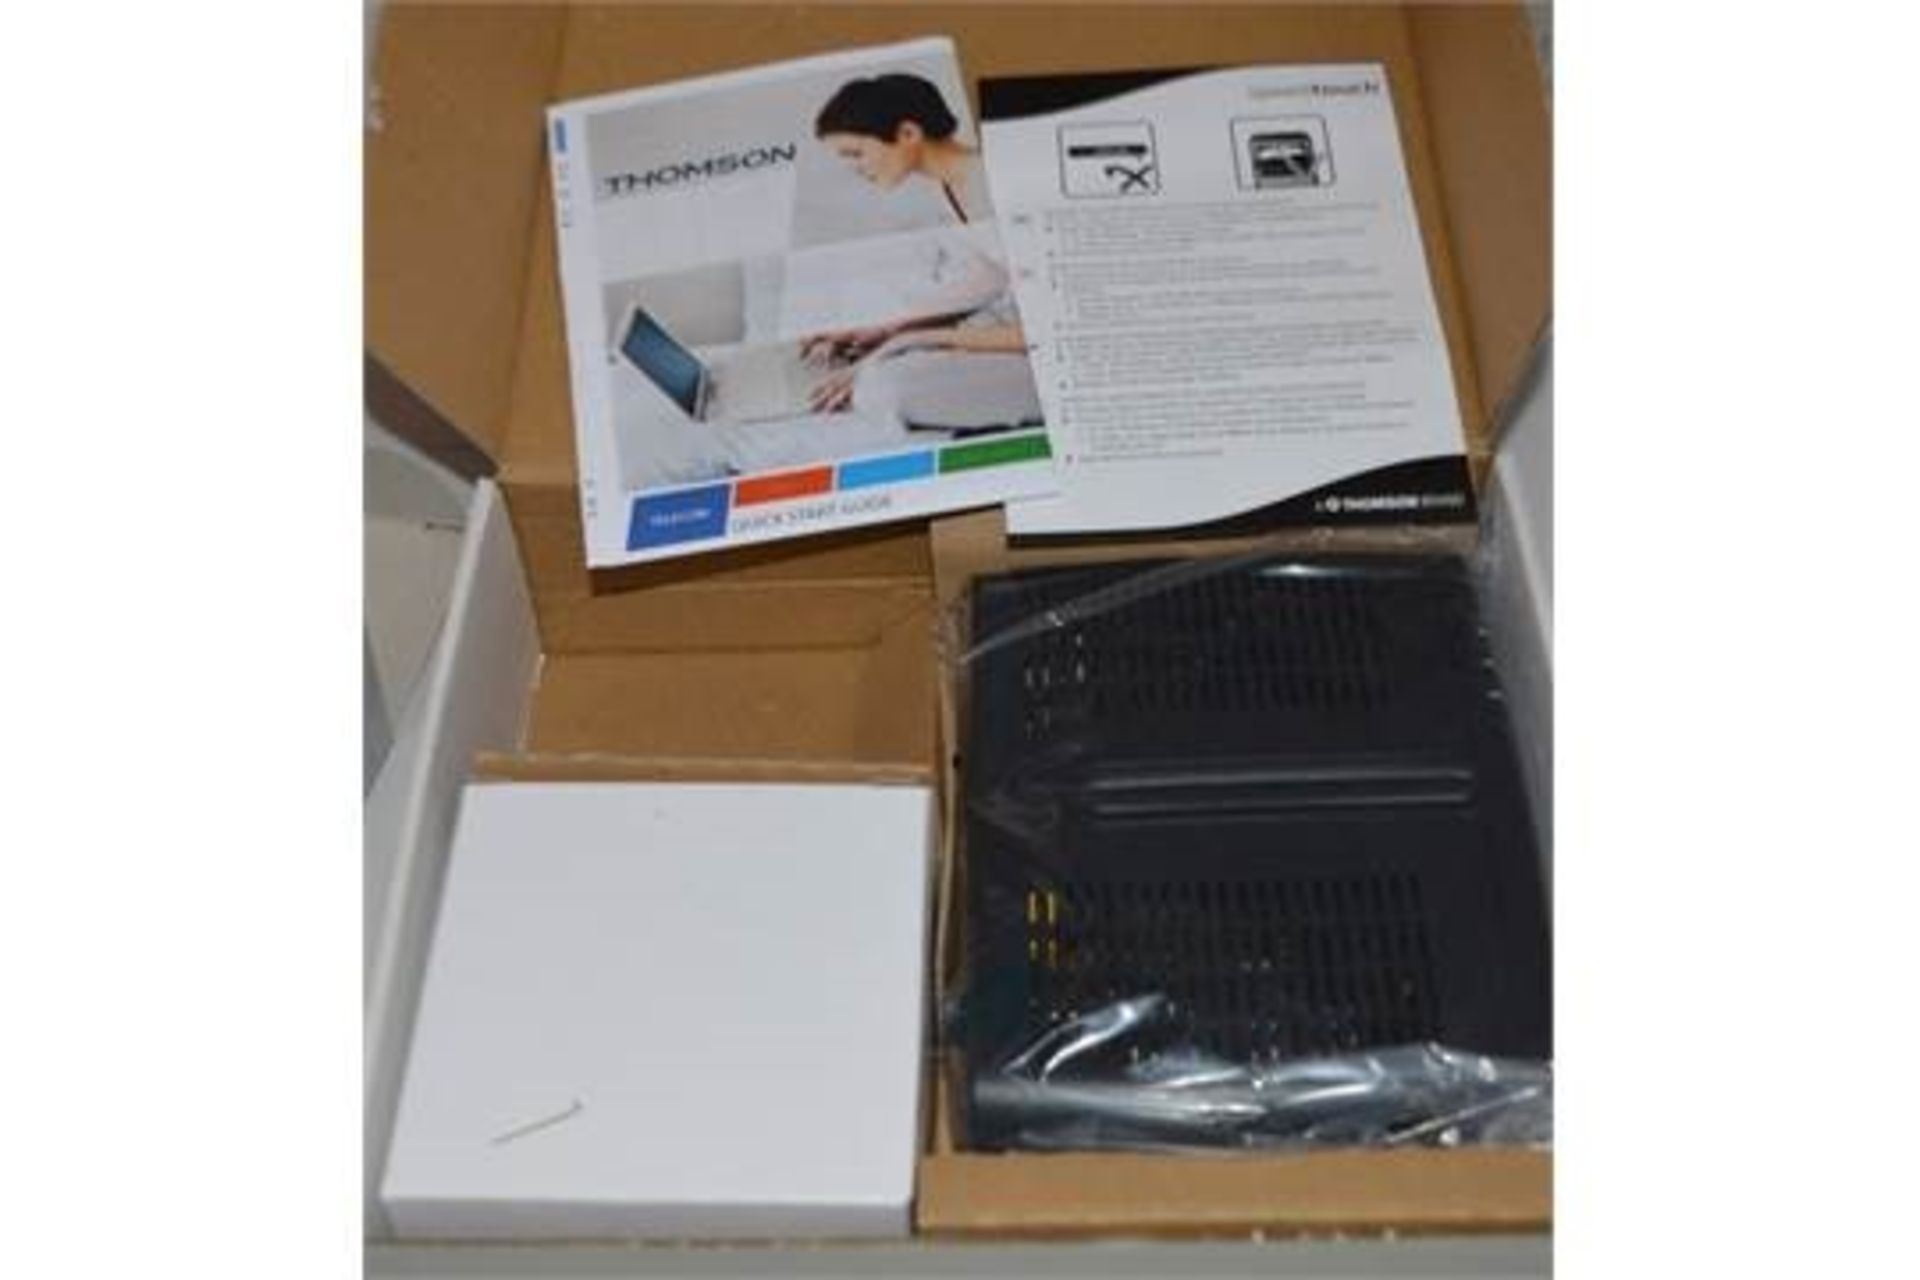 5 x Thompson Speedtouch 546i v6 Multi User ADSL2+ Gateway Router - New Boxed Stock - CL300 - - Image 2 of 2